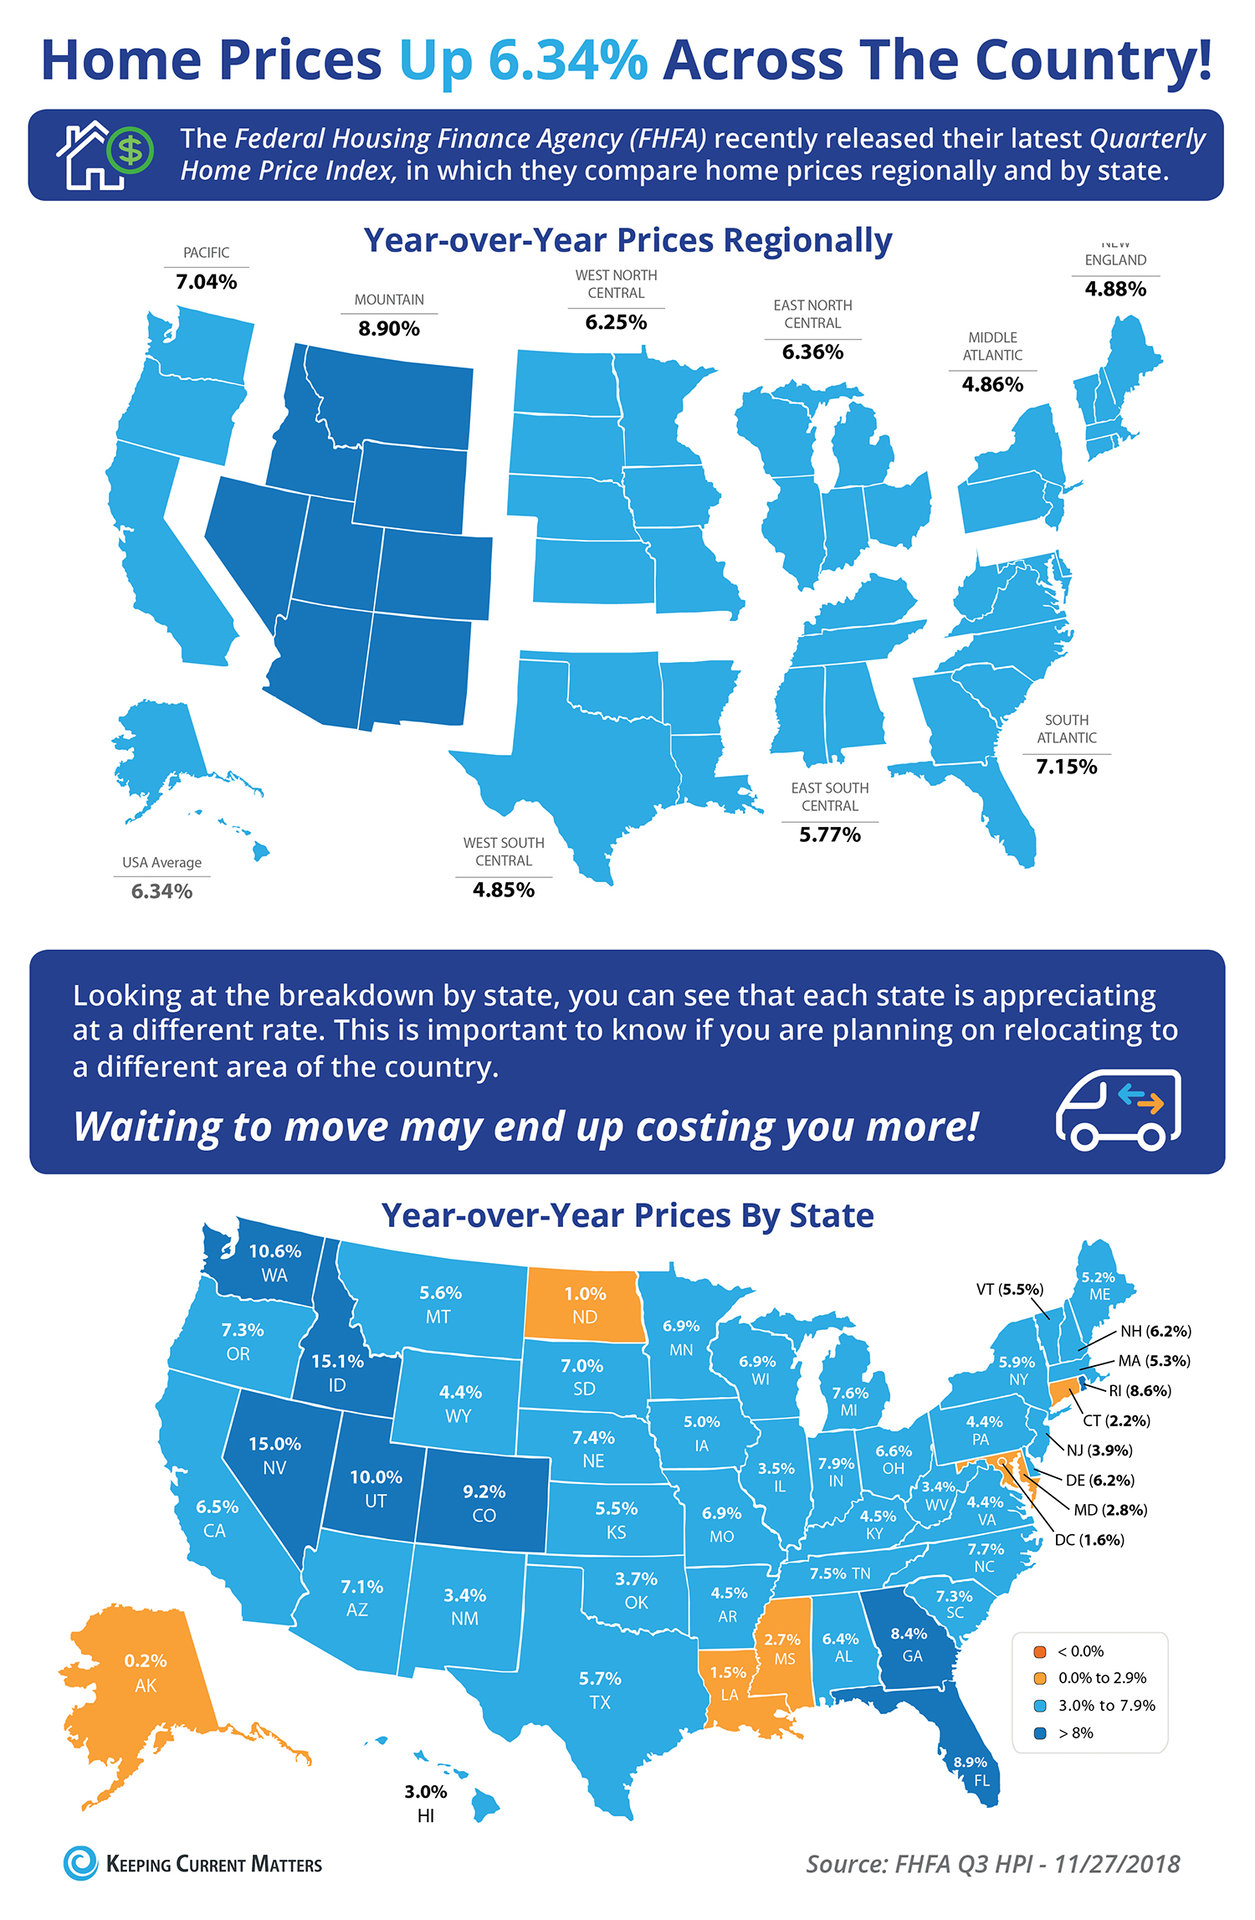 Home Prices Up 6.34% Across the Country! [INFOGRAPHIC] | Keeping Current Matters